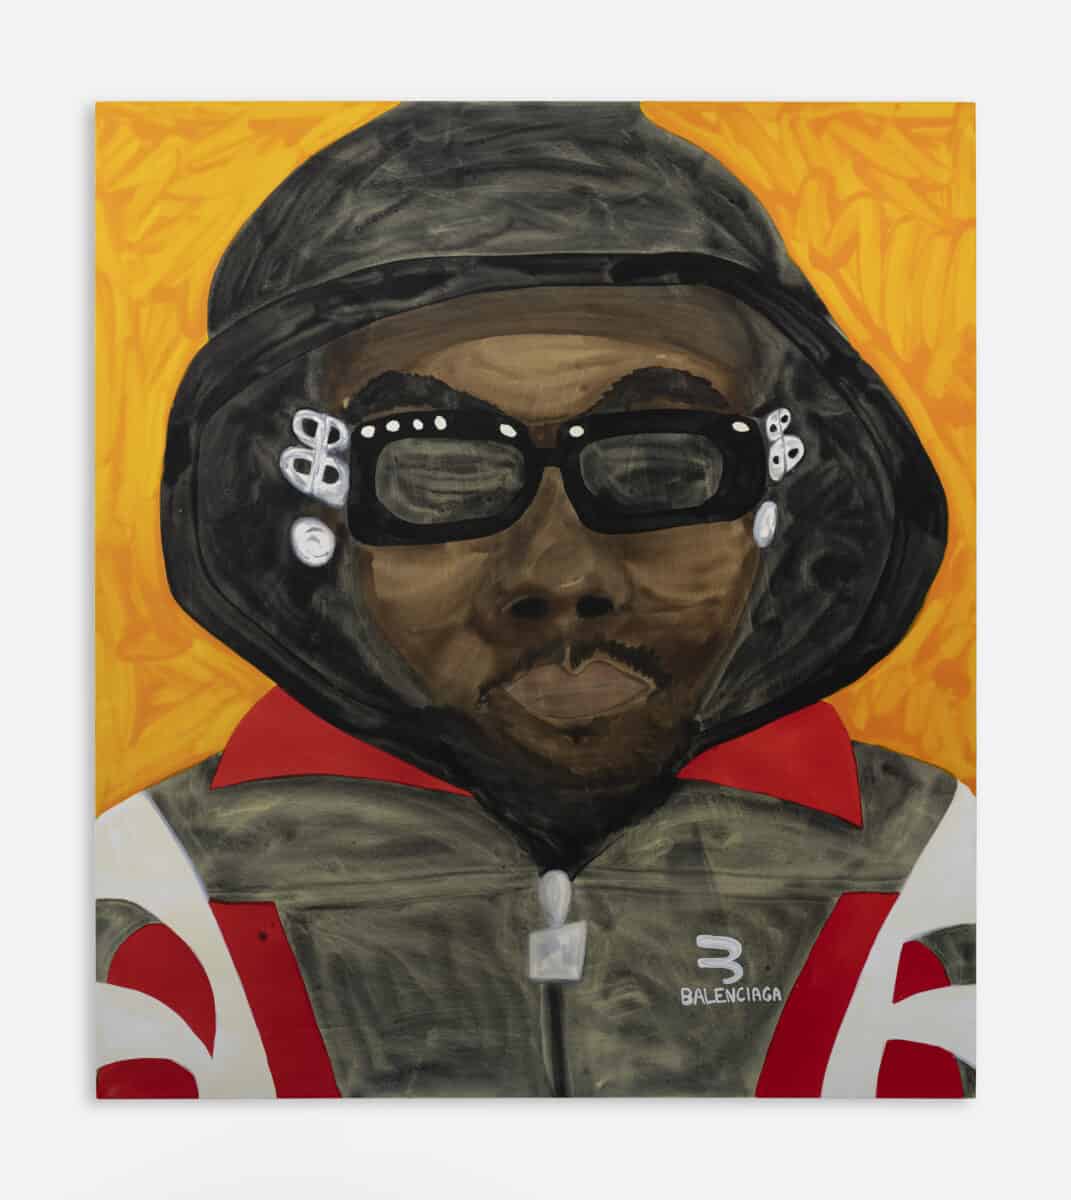 Travis Fish, Offset/Balenciaga, 2022. Acrylic on canvas, 96 by 84 in (243.84 by 213.36 cm). Courtesy of the artist and Jupiter Contemporary, Miami.